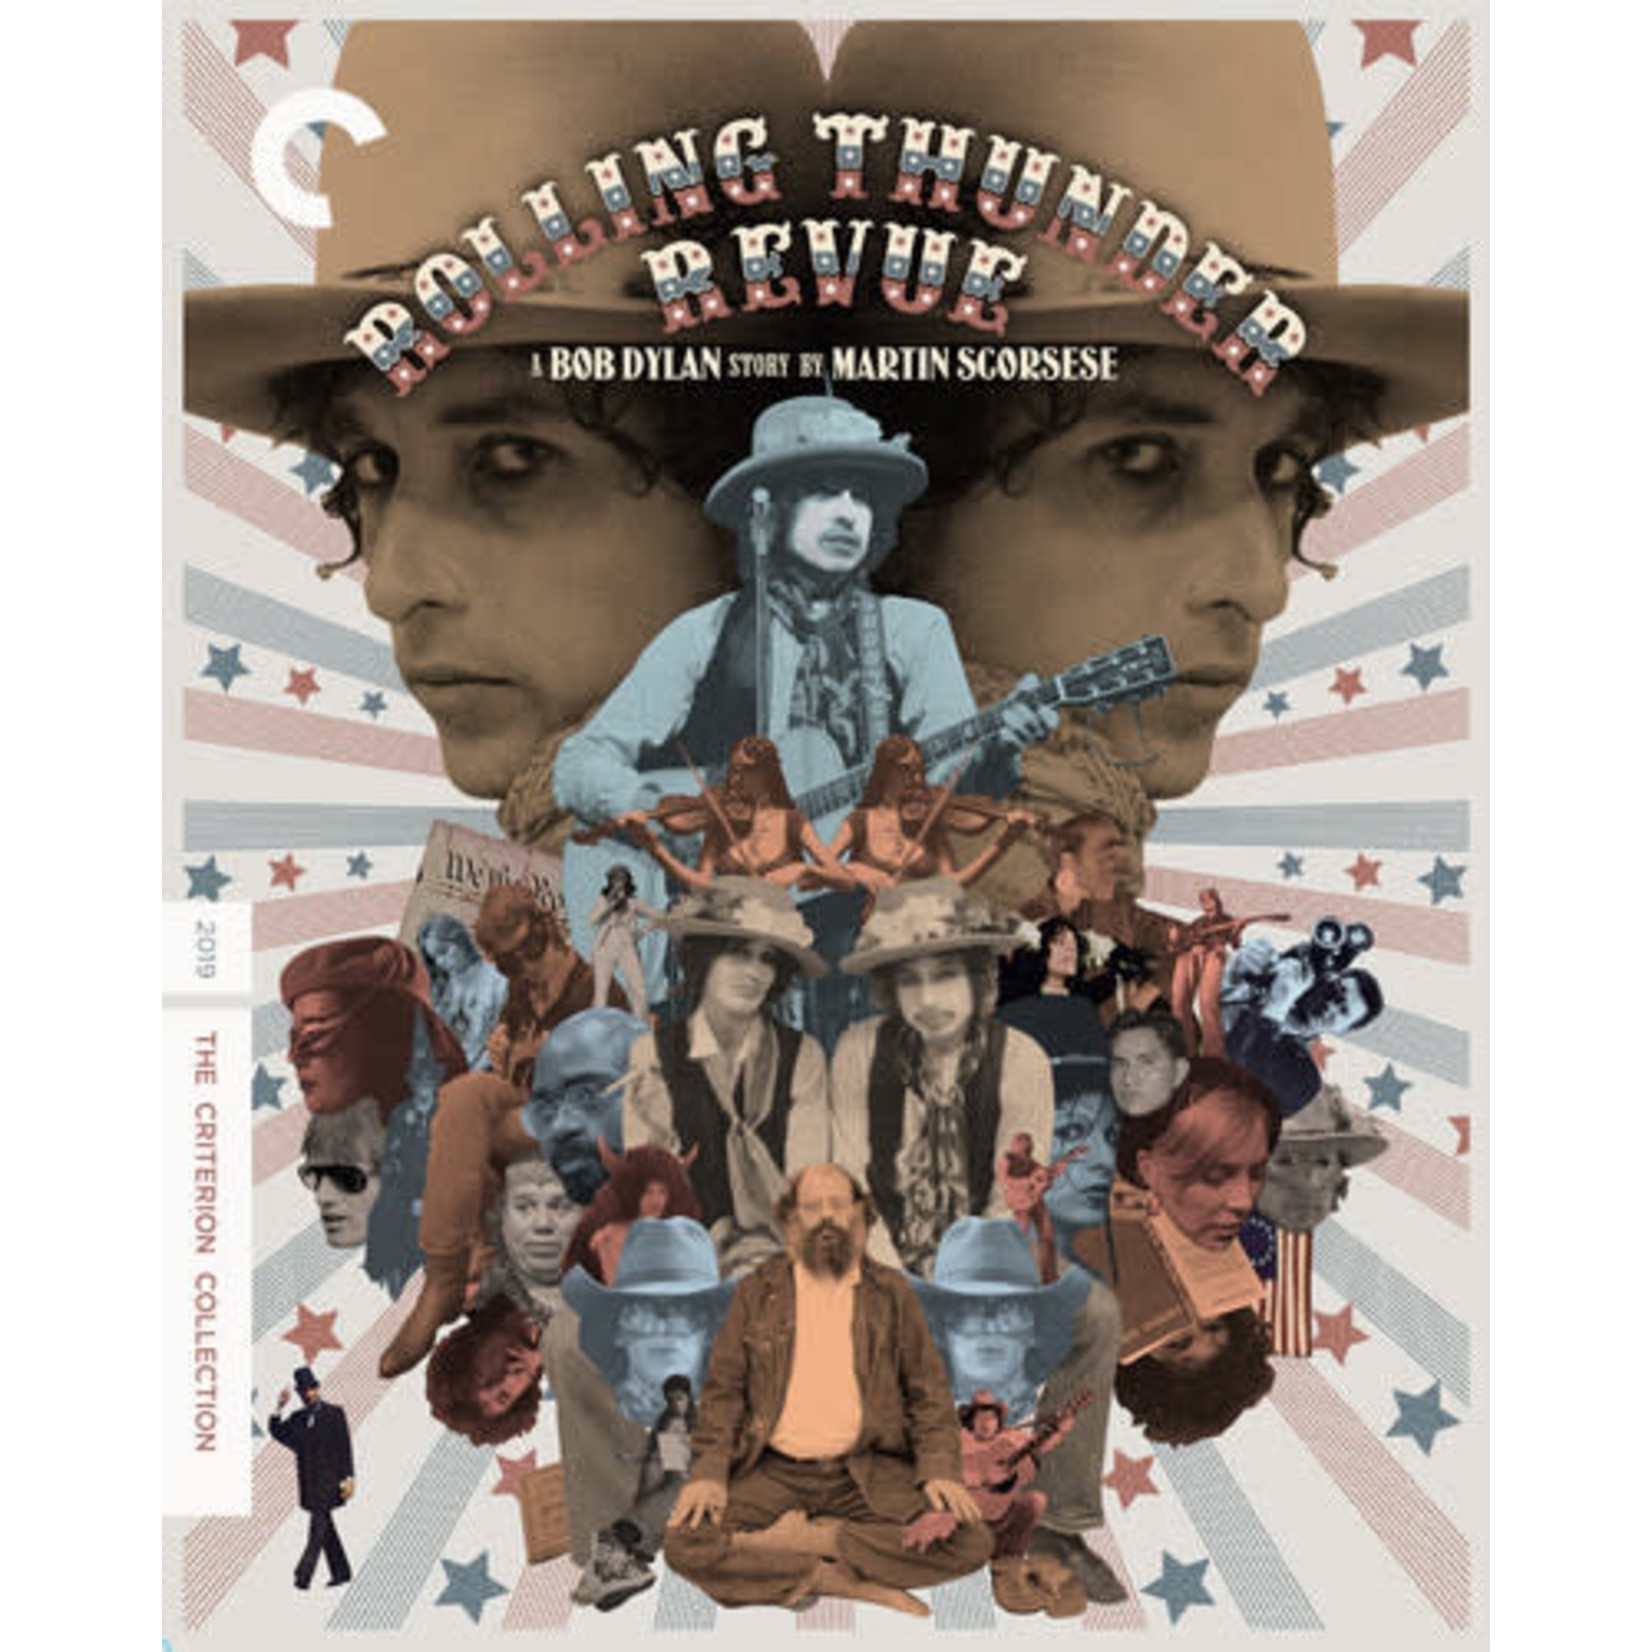 Criterion Collection Rolling Thunder Revue: A Bob Dylan Story by Martin Scorsese (BD)